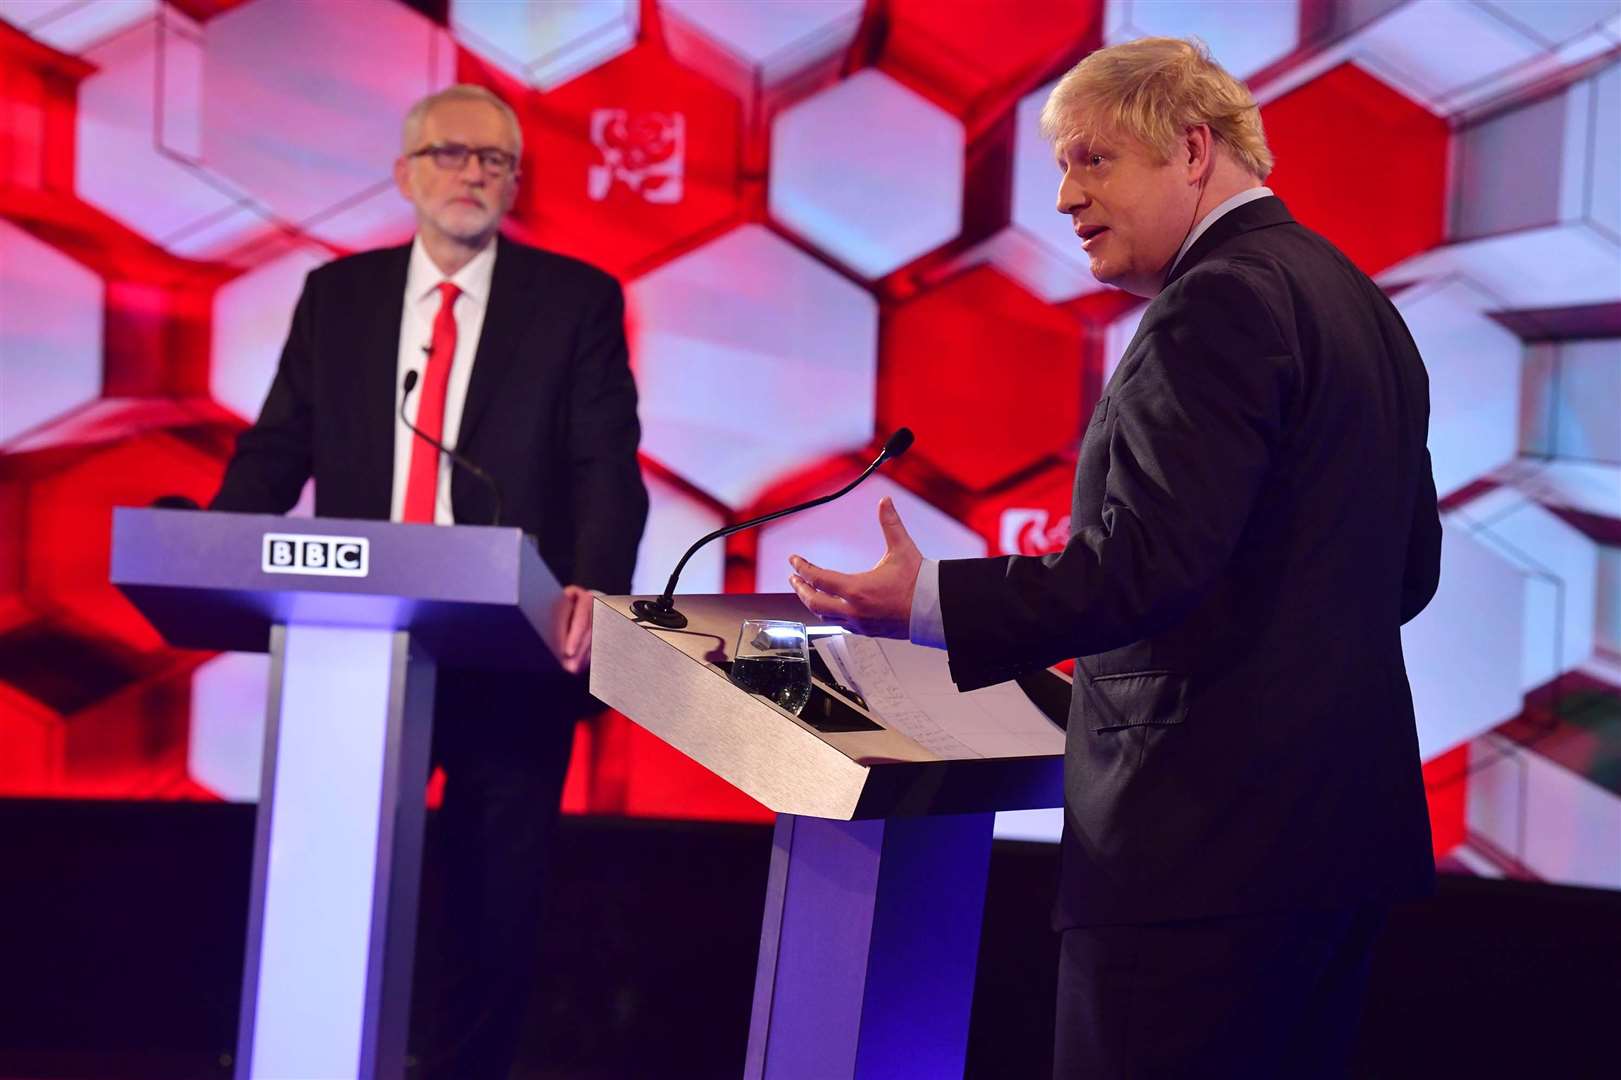 Prime Minister Boris Johnson (right) and Labour leader Jeremy Corbyn going head to head in the BBC Election Debate in Maidstone Picture: Jeff Overs/Press Association Images